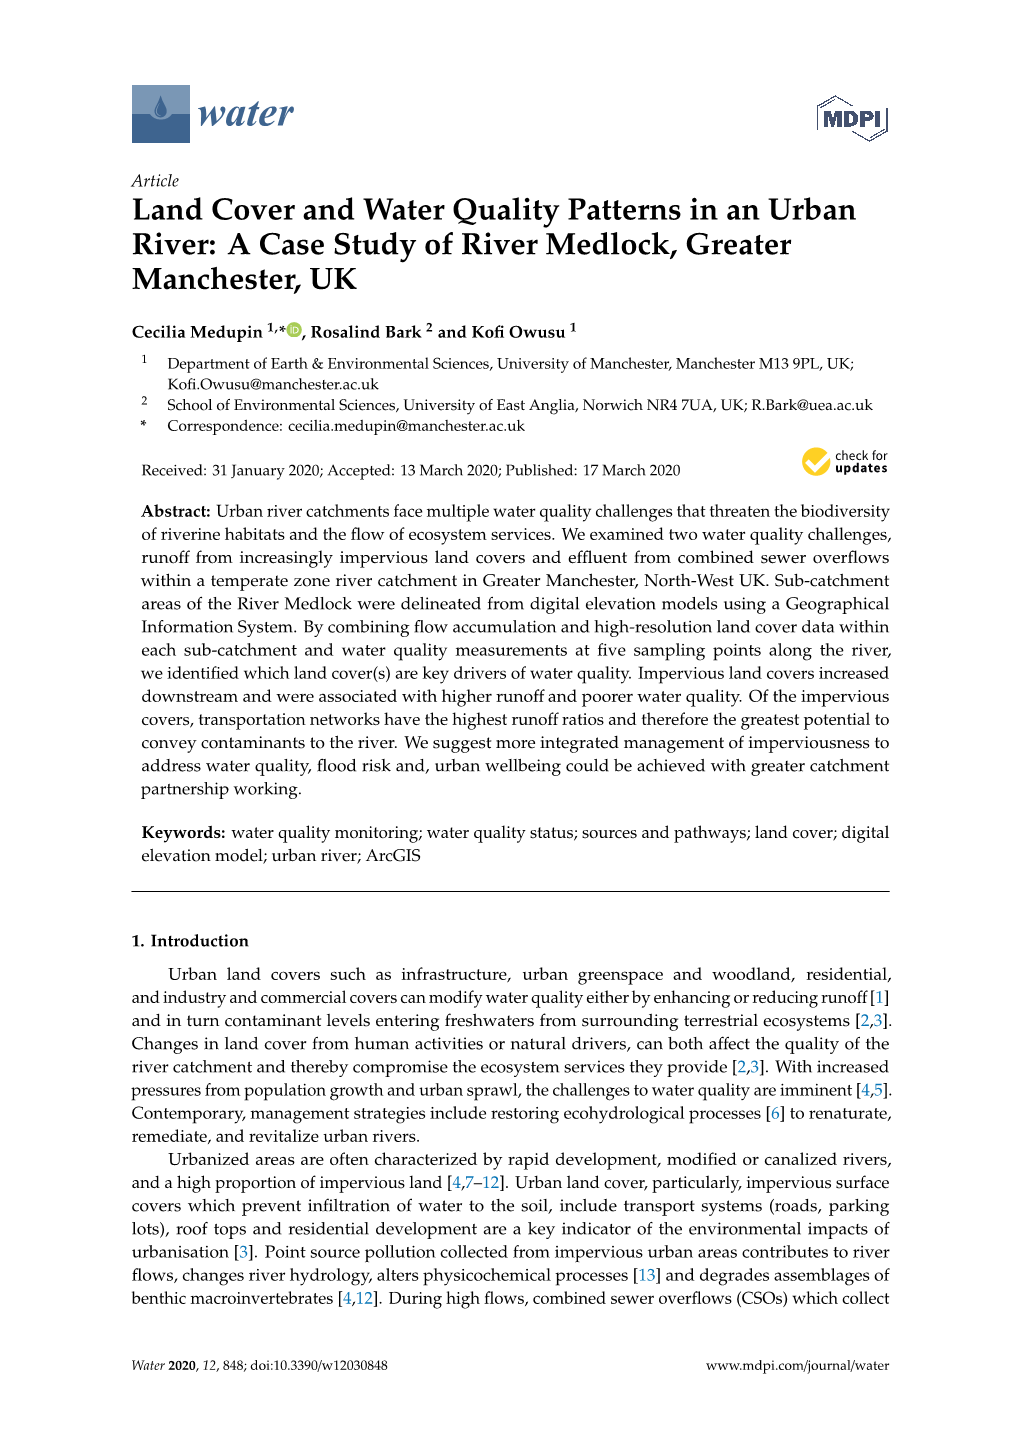 Land Cover and Water Quality Patterns in an Urban River: a Case Study of River Medlock, Greater Manchester, UK